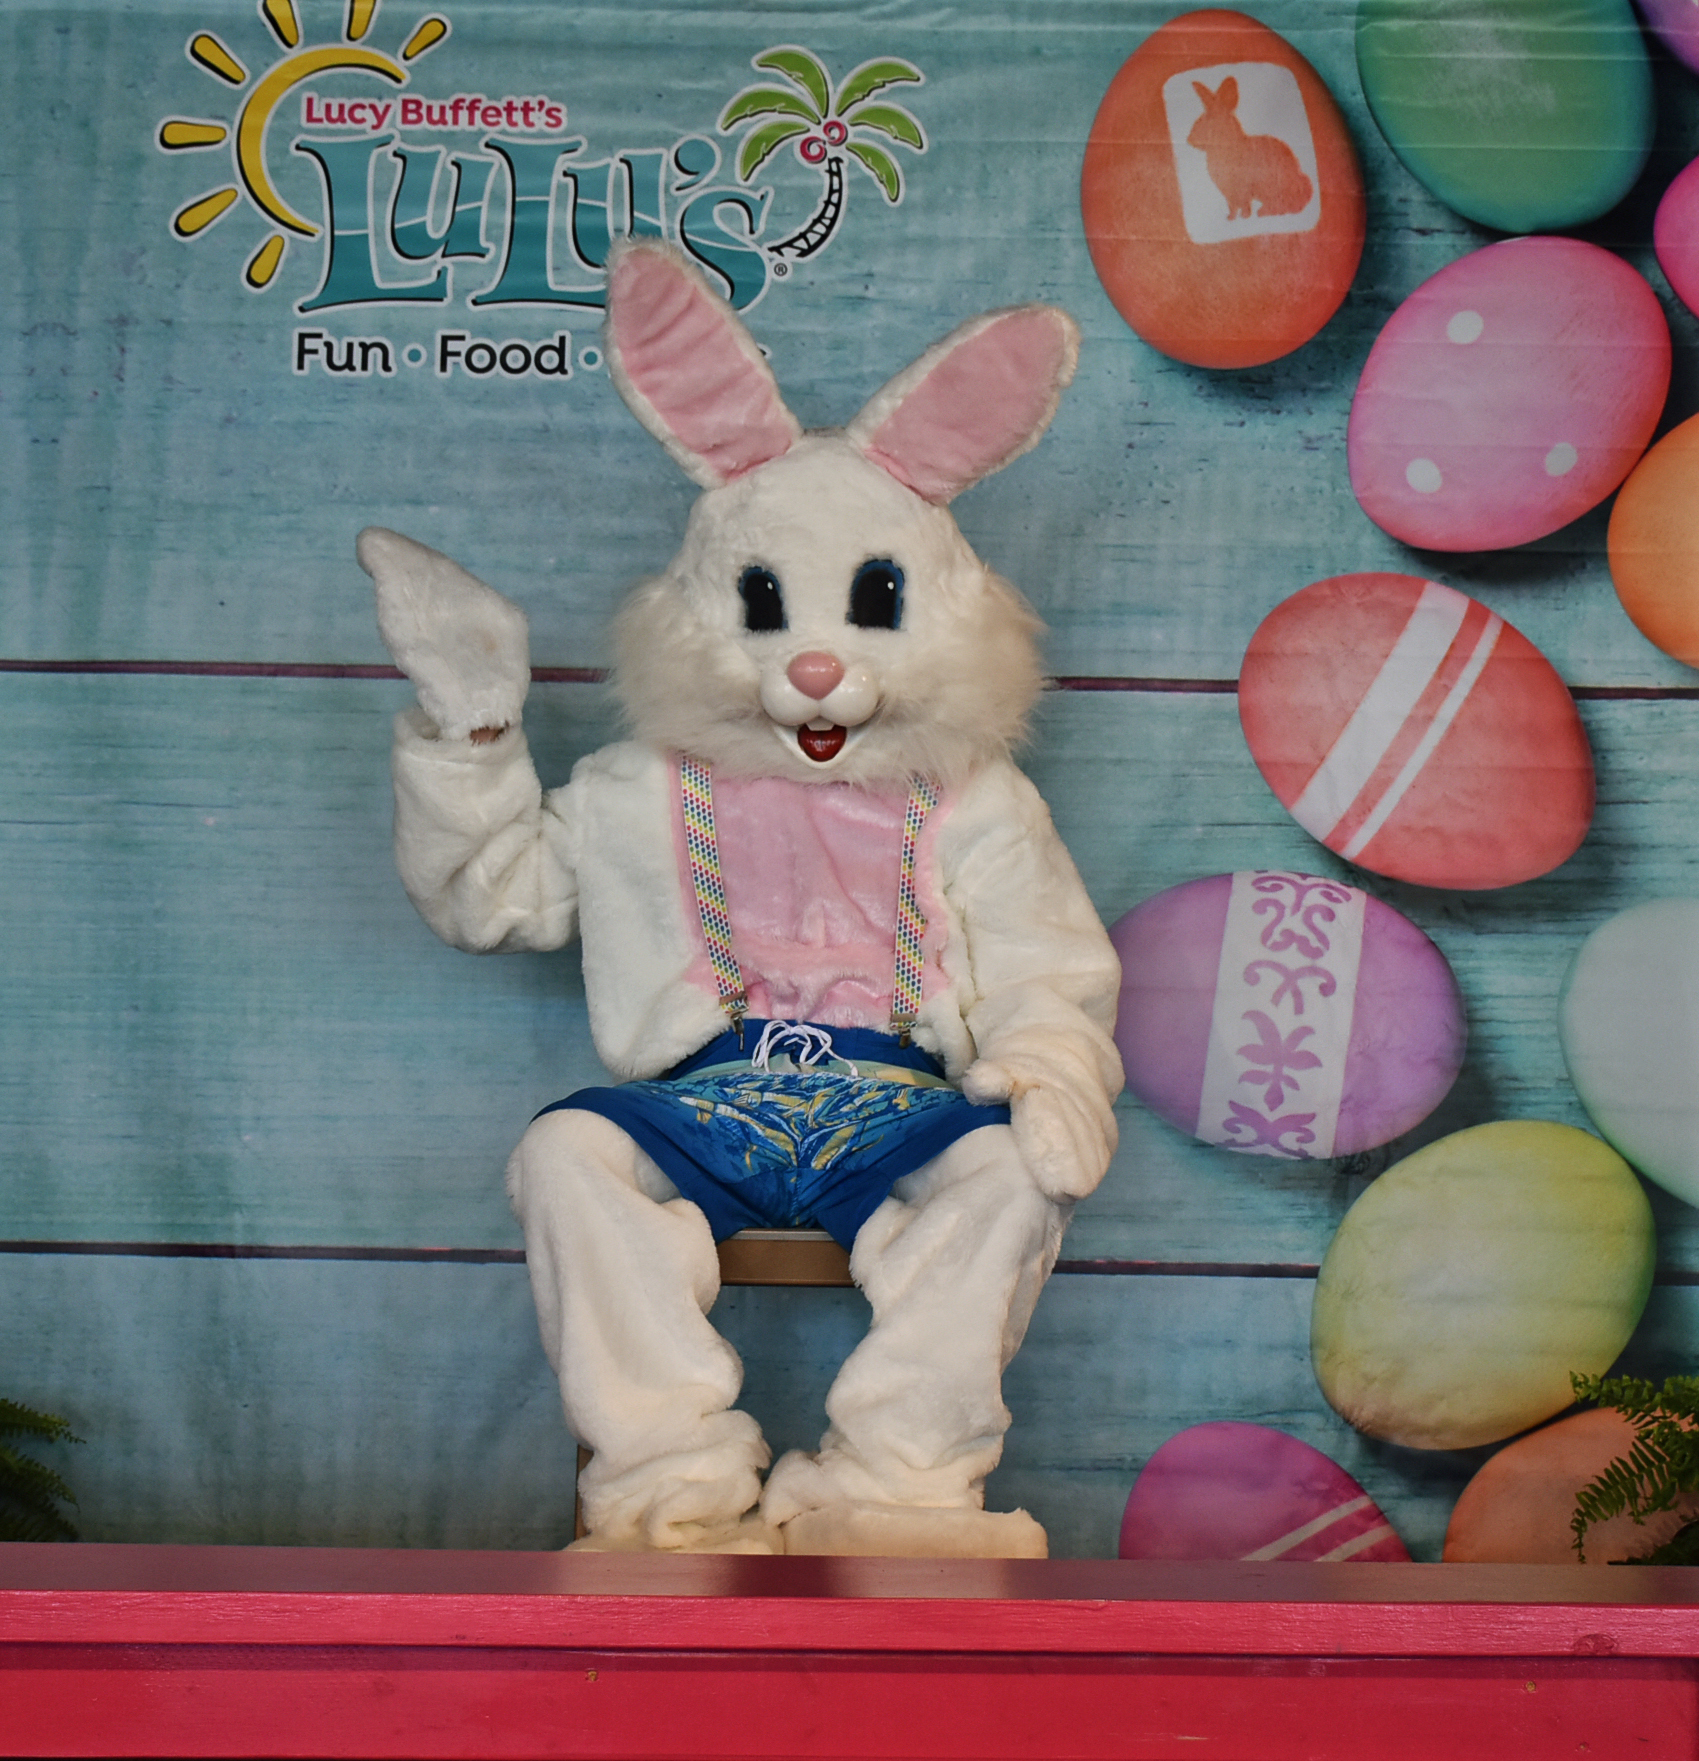 The Easter bunny will be at LuLu’s in Destin on Easter Sunday